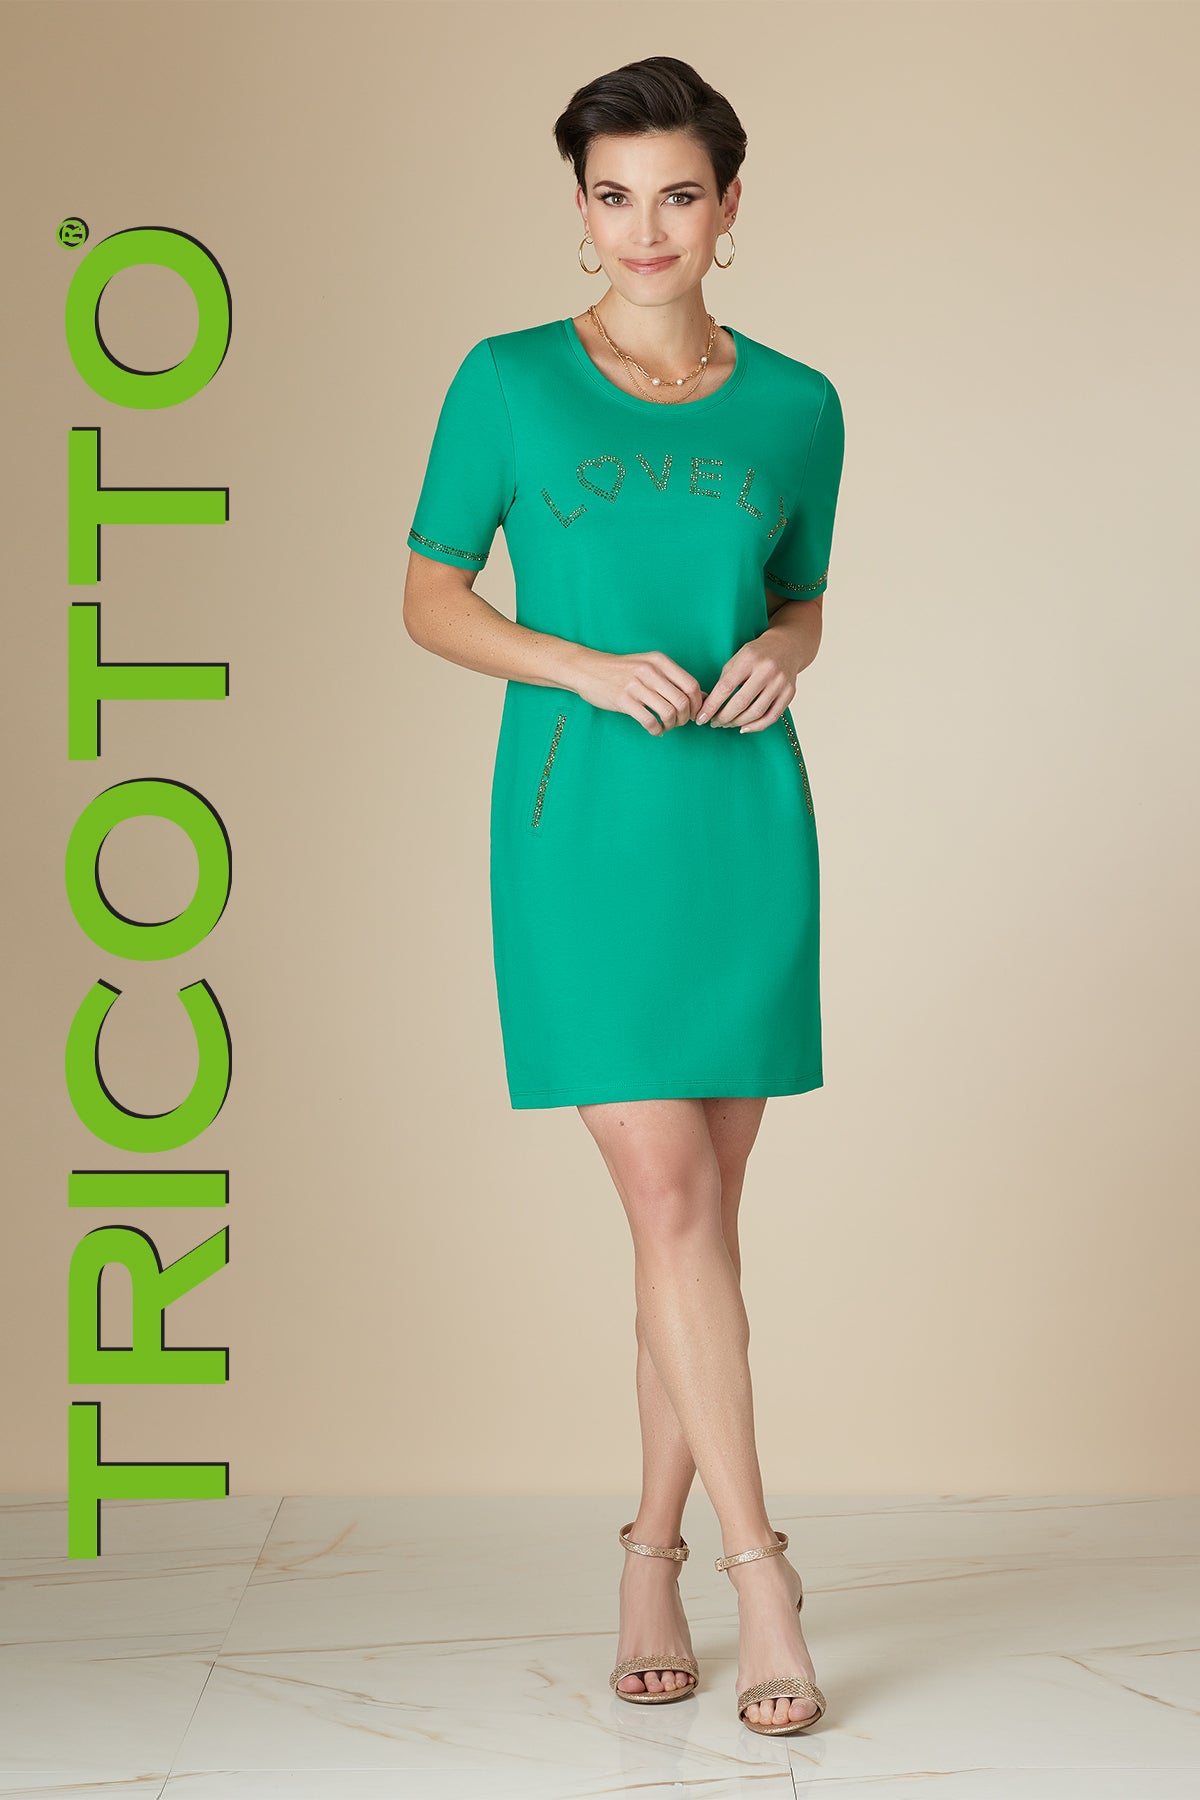 Tricotto Green Dress-Tricotto Green Love Print Sequin Dress